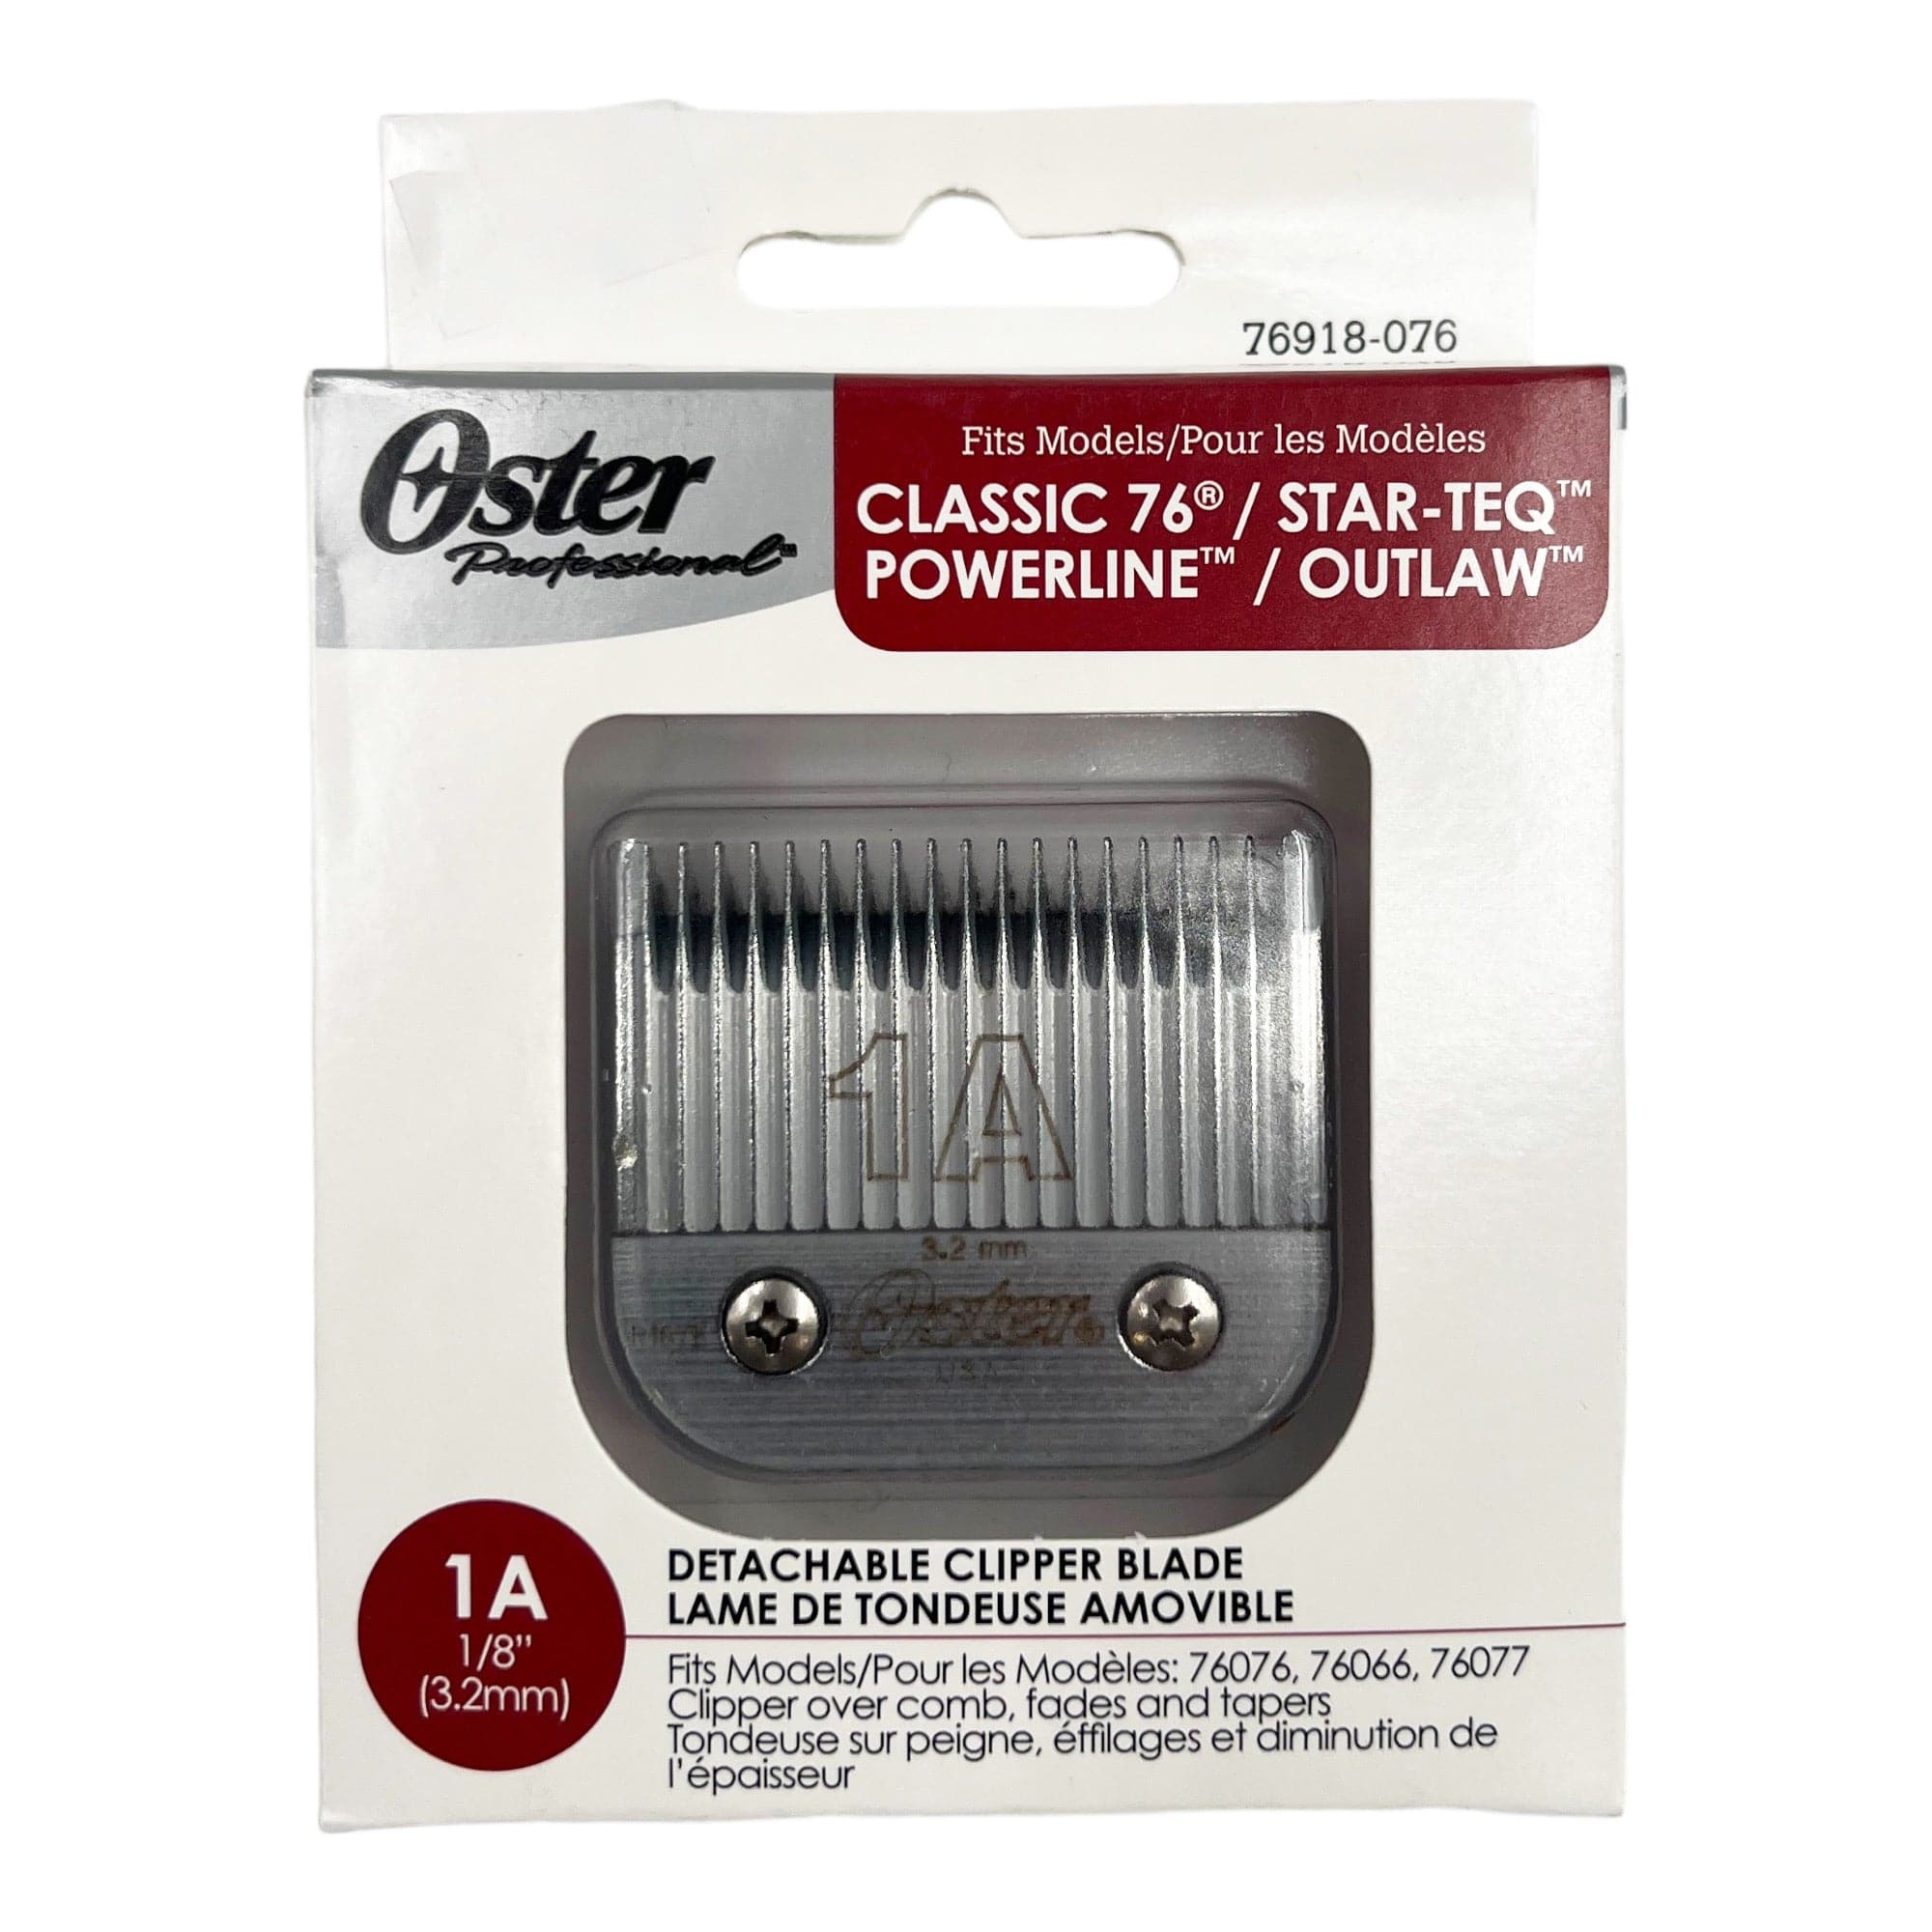 Oster - Detachable Blade Size 1A 3.2mm 076918-076